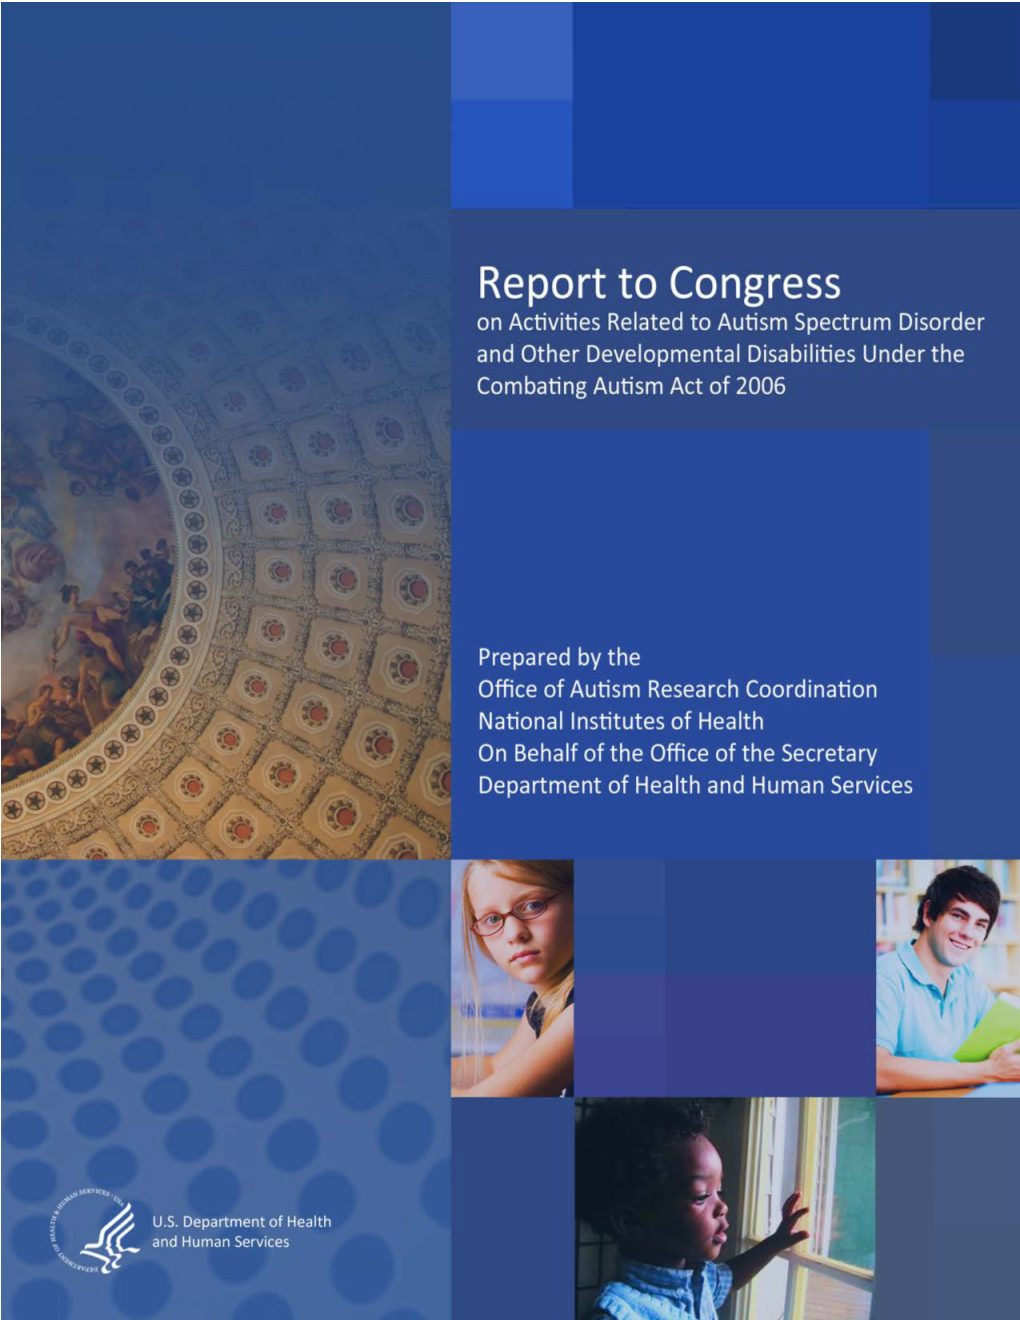 Report to Congress on Activities Related to Autism Spectrum Disorder and Other Developmental Disabilities Under the Combating Autism Act of 2006 (Fy 2006–Fy 2009)